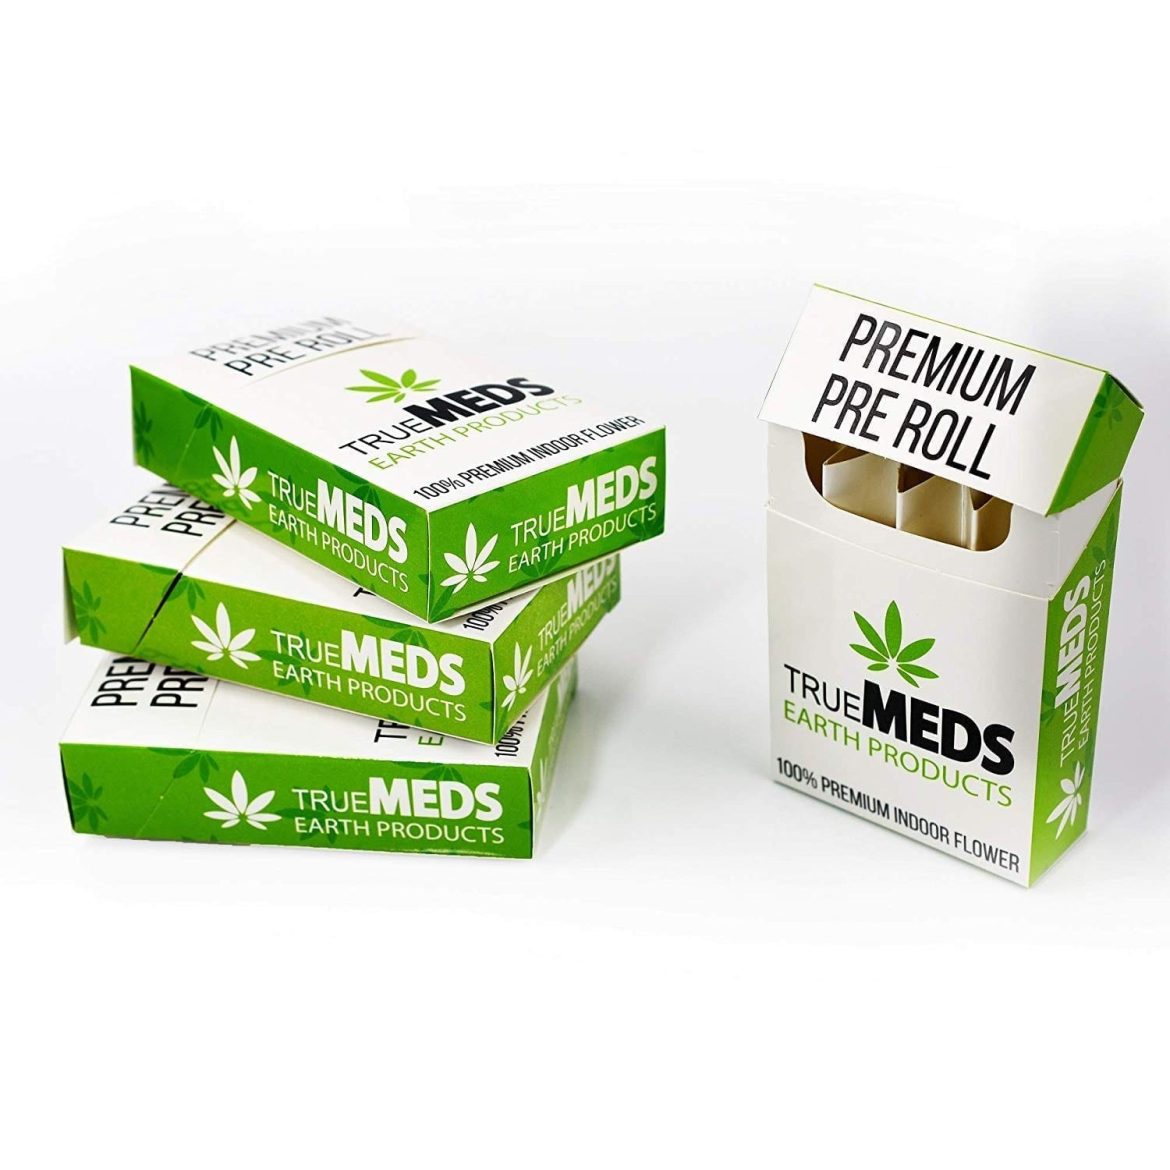 Are There Different Sizes Available for Pre Roll Display Boxes?